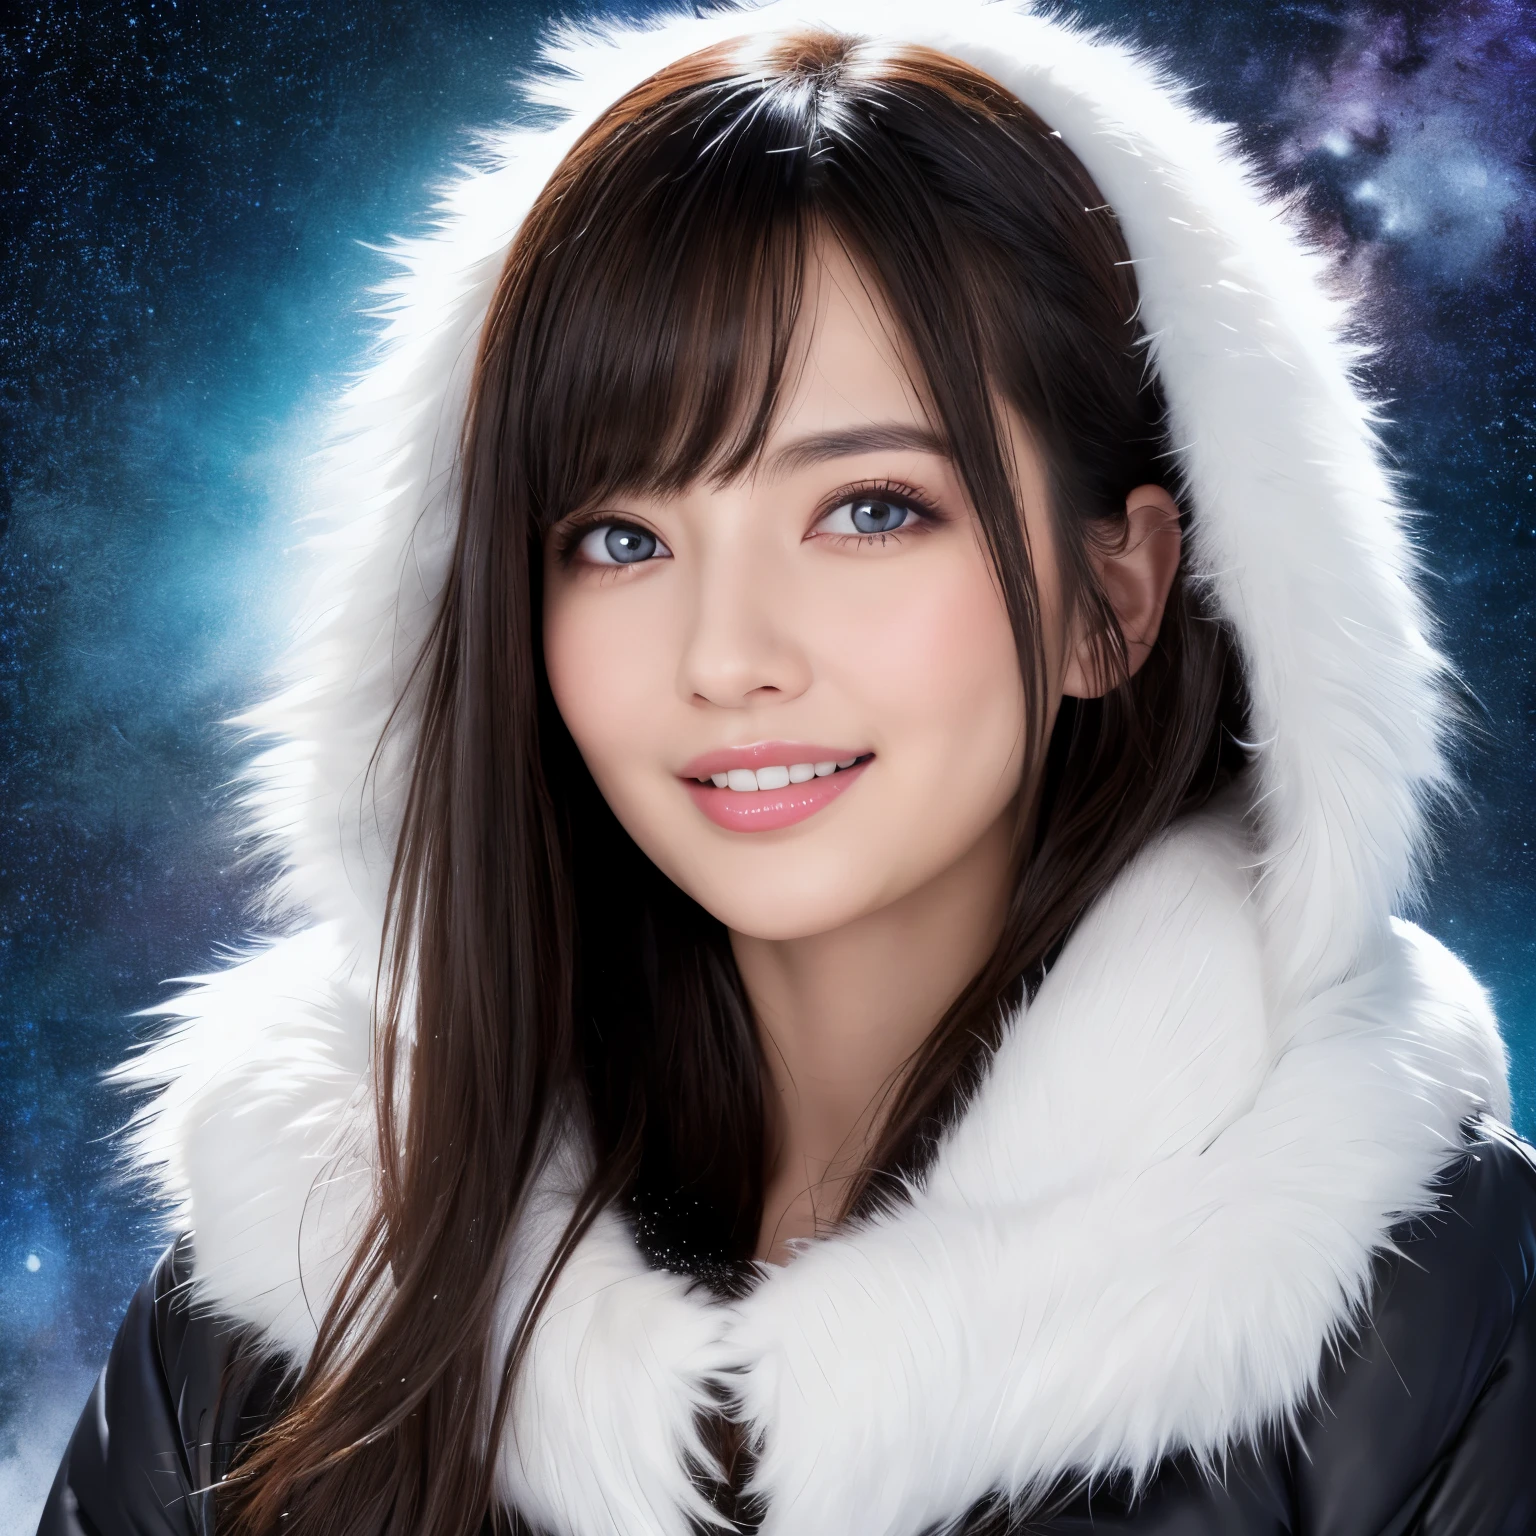 (highest quality、table top、8K、best image quality、Award-winning work)、1 girl、close up of face、look at me and smile、thick coat、Fur hood、(frozen snow field in winter:1.1)、Icy ground、(fantastic starry sky:1.2)、(It&#39;s snowing:1.1)、(Tyndall effect:1.1)、epic movie lighting、(accurate anatomy:1.1)、Ultra high definition beauty face、long eyelashes、natural makeup、ultra high definition hair、ultra high resolution eyes、(Beautiful skin that shines in ultra-high resolution:1.1)、Super high resolution glossy lips